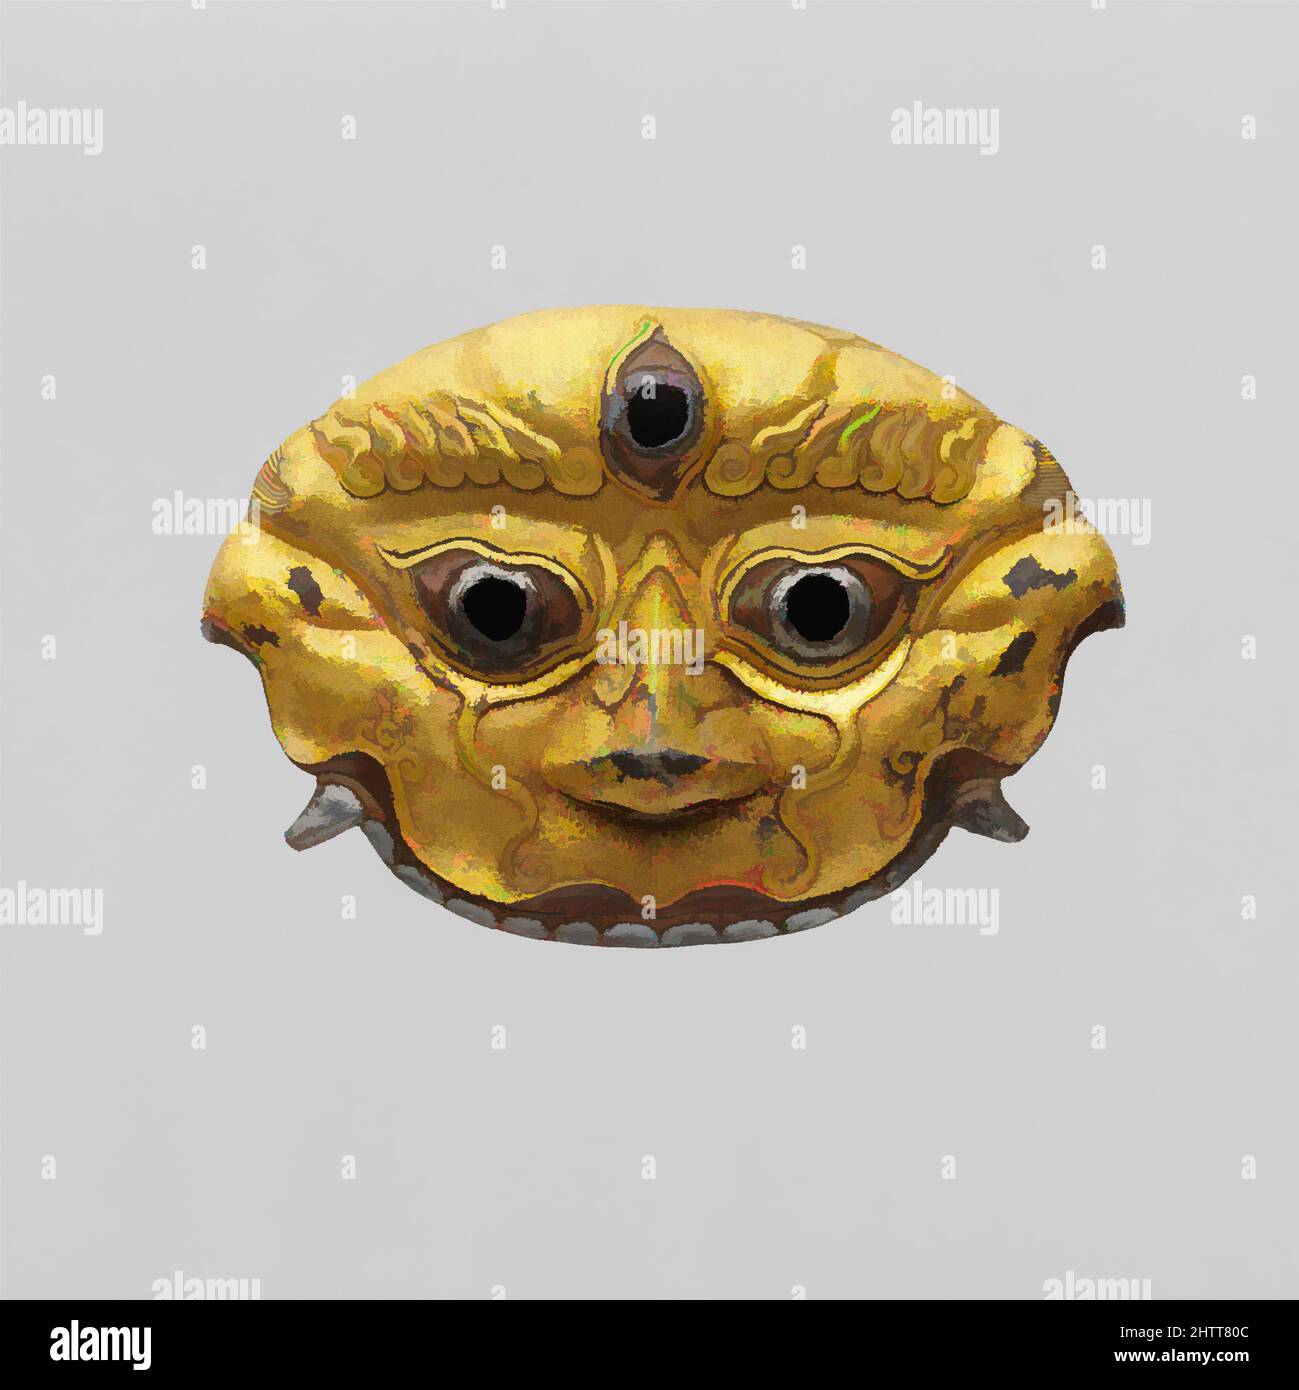 Art inspired by Sword Guard, 14th–15th century, Tibetan or Chinese, Iron, gold, silver, copper, H. 3 1/4 in. (8.3 cm); W. 4 3/4 in. (12.1 cm), Swords, Depicting the face of a wrathful Tibetan Buddhist guardian deity, this extremely rare sword guard was originally part of a complete and, Classic works modernized by Artotop with a splash of modernity. Shapes, color and value, eye-catching visual impact on art. Emotions through freedom of artworks in a contemporary way. A timeless message pursuing a wildly creative new direction. Artists turning to the digital medium and creating the Artotop NFT Stock Photo